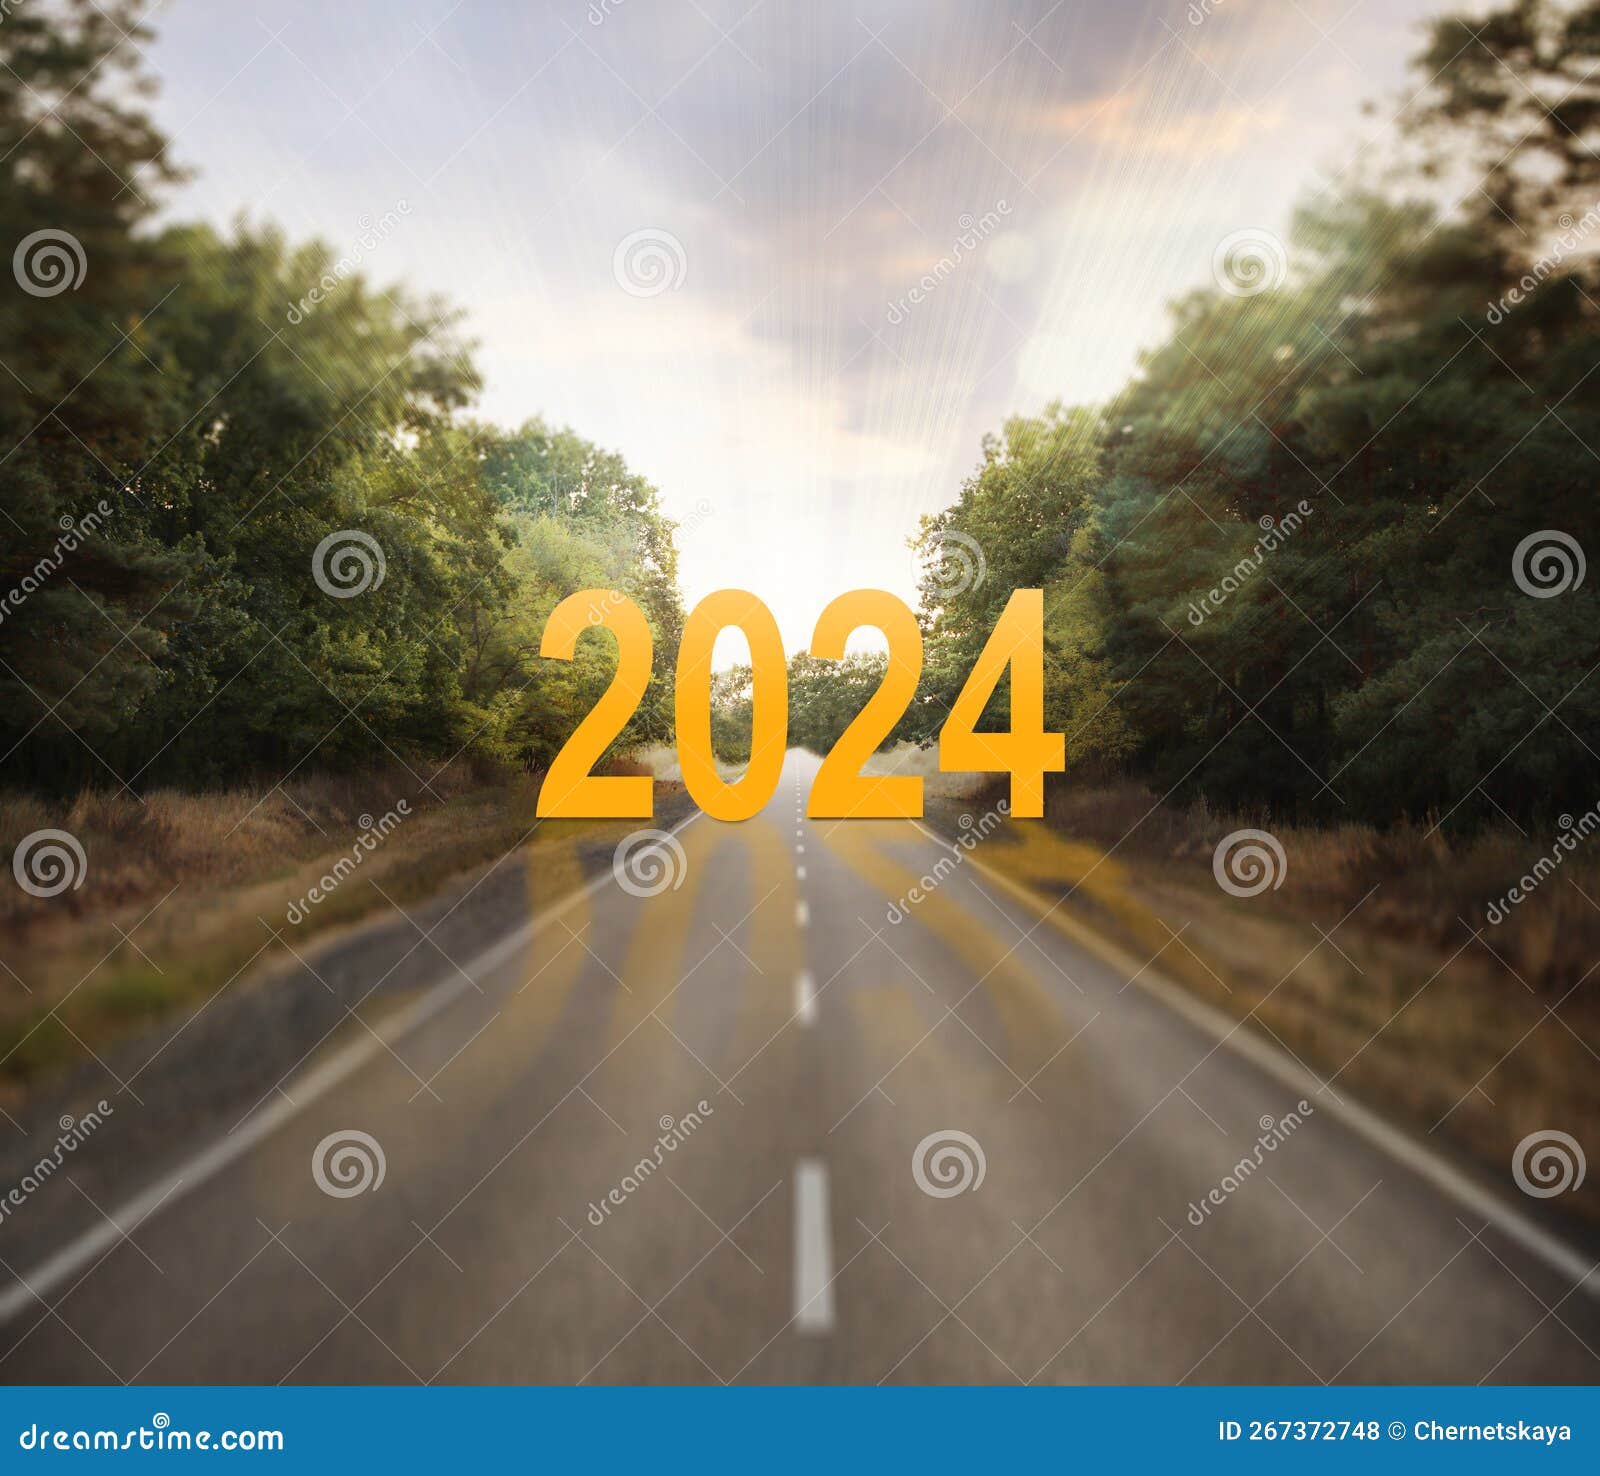 Start New Year Asphalt Road Leading To Numbers 267372748 